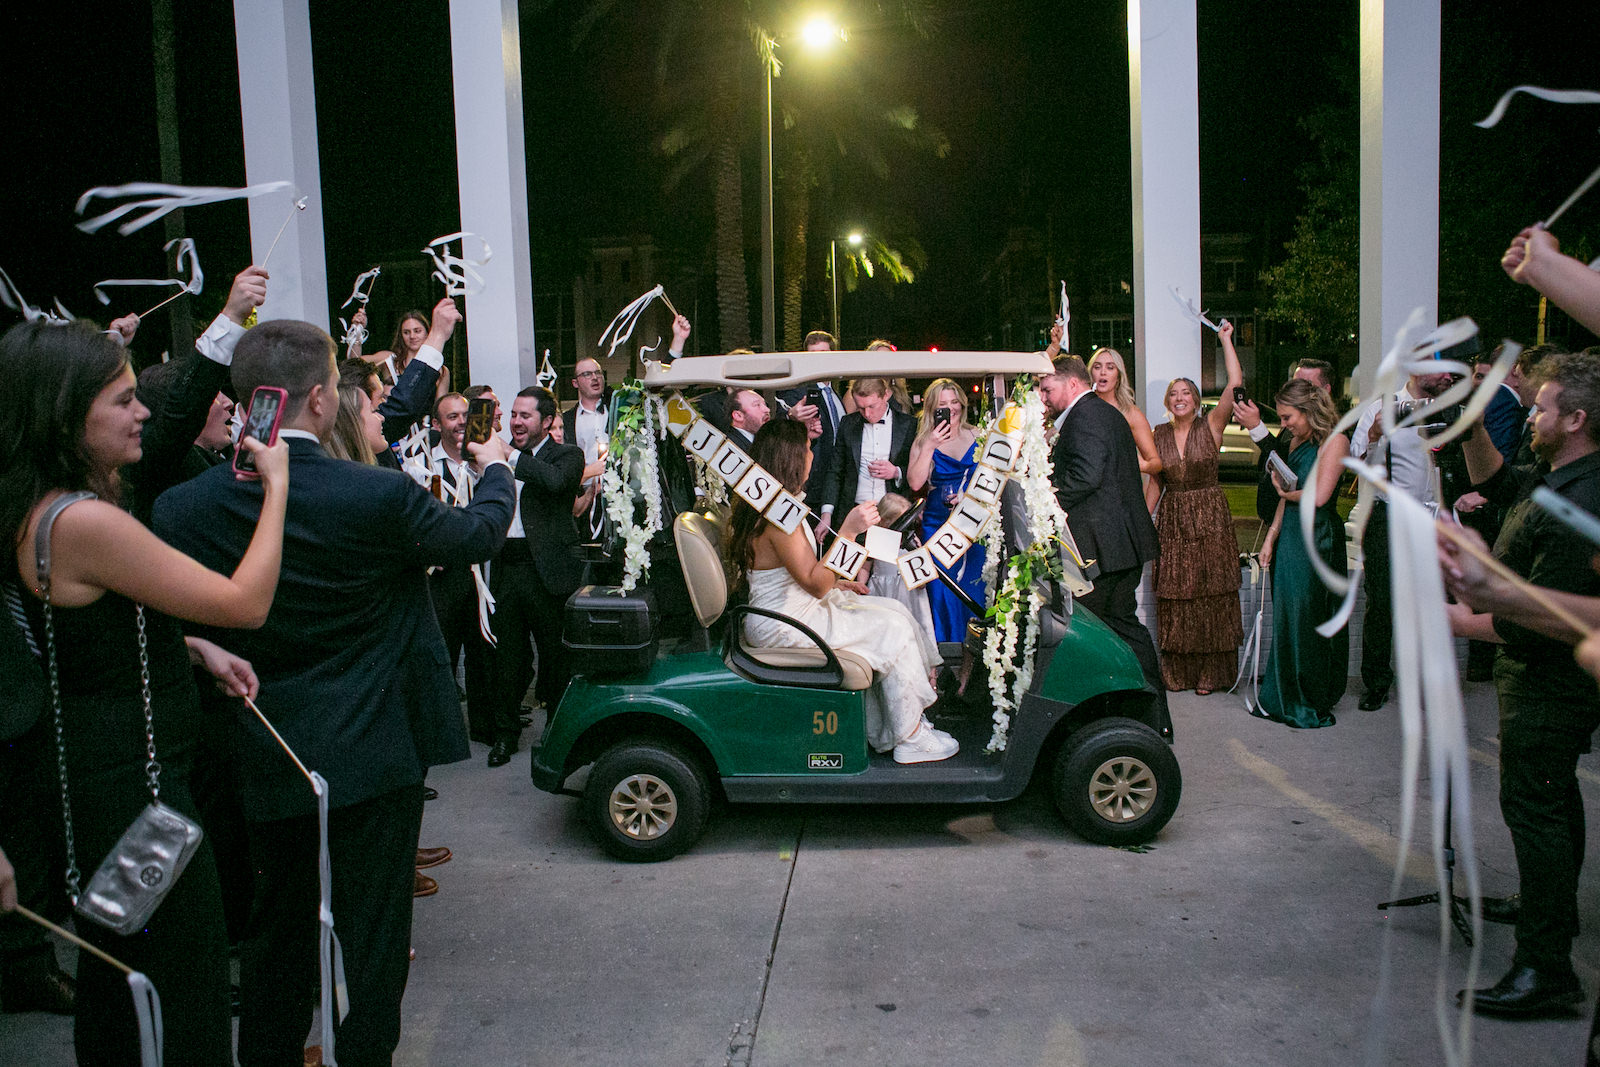 Green and Gold Christmas Wedding, Bride Wearing Wedding Jumpsuit and Groom in Golf Cart, Ribbon Reception Exit | Tampa Bay Wedding Photographer Carrie Wildes Photography